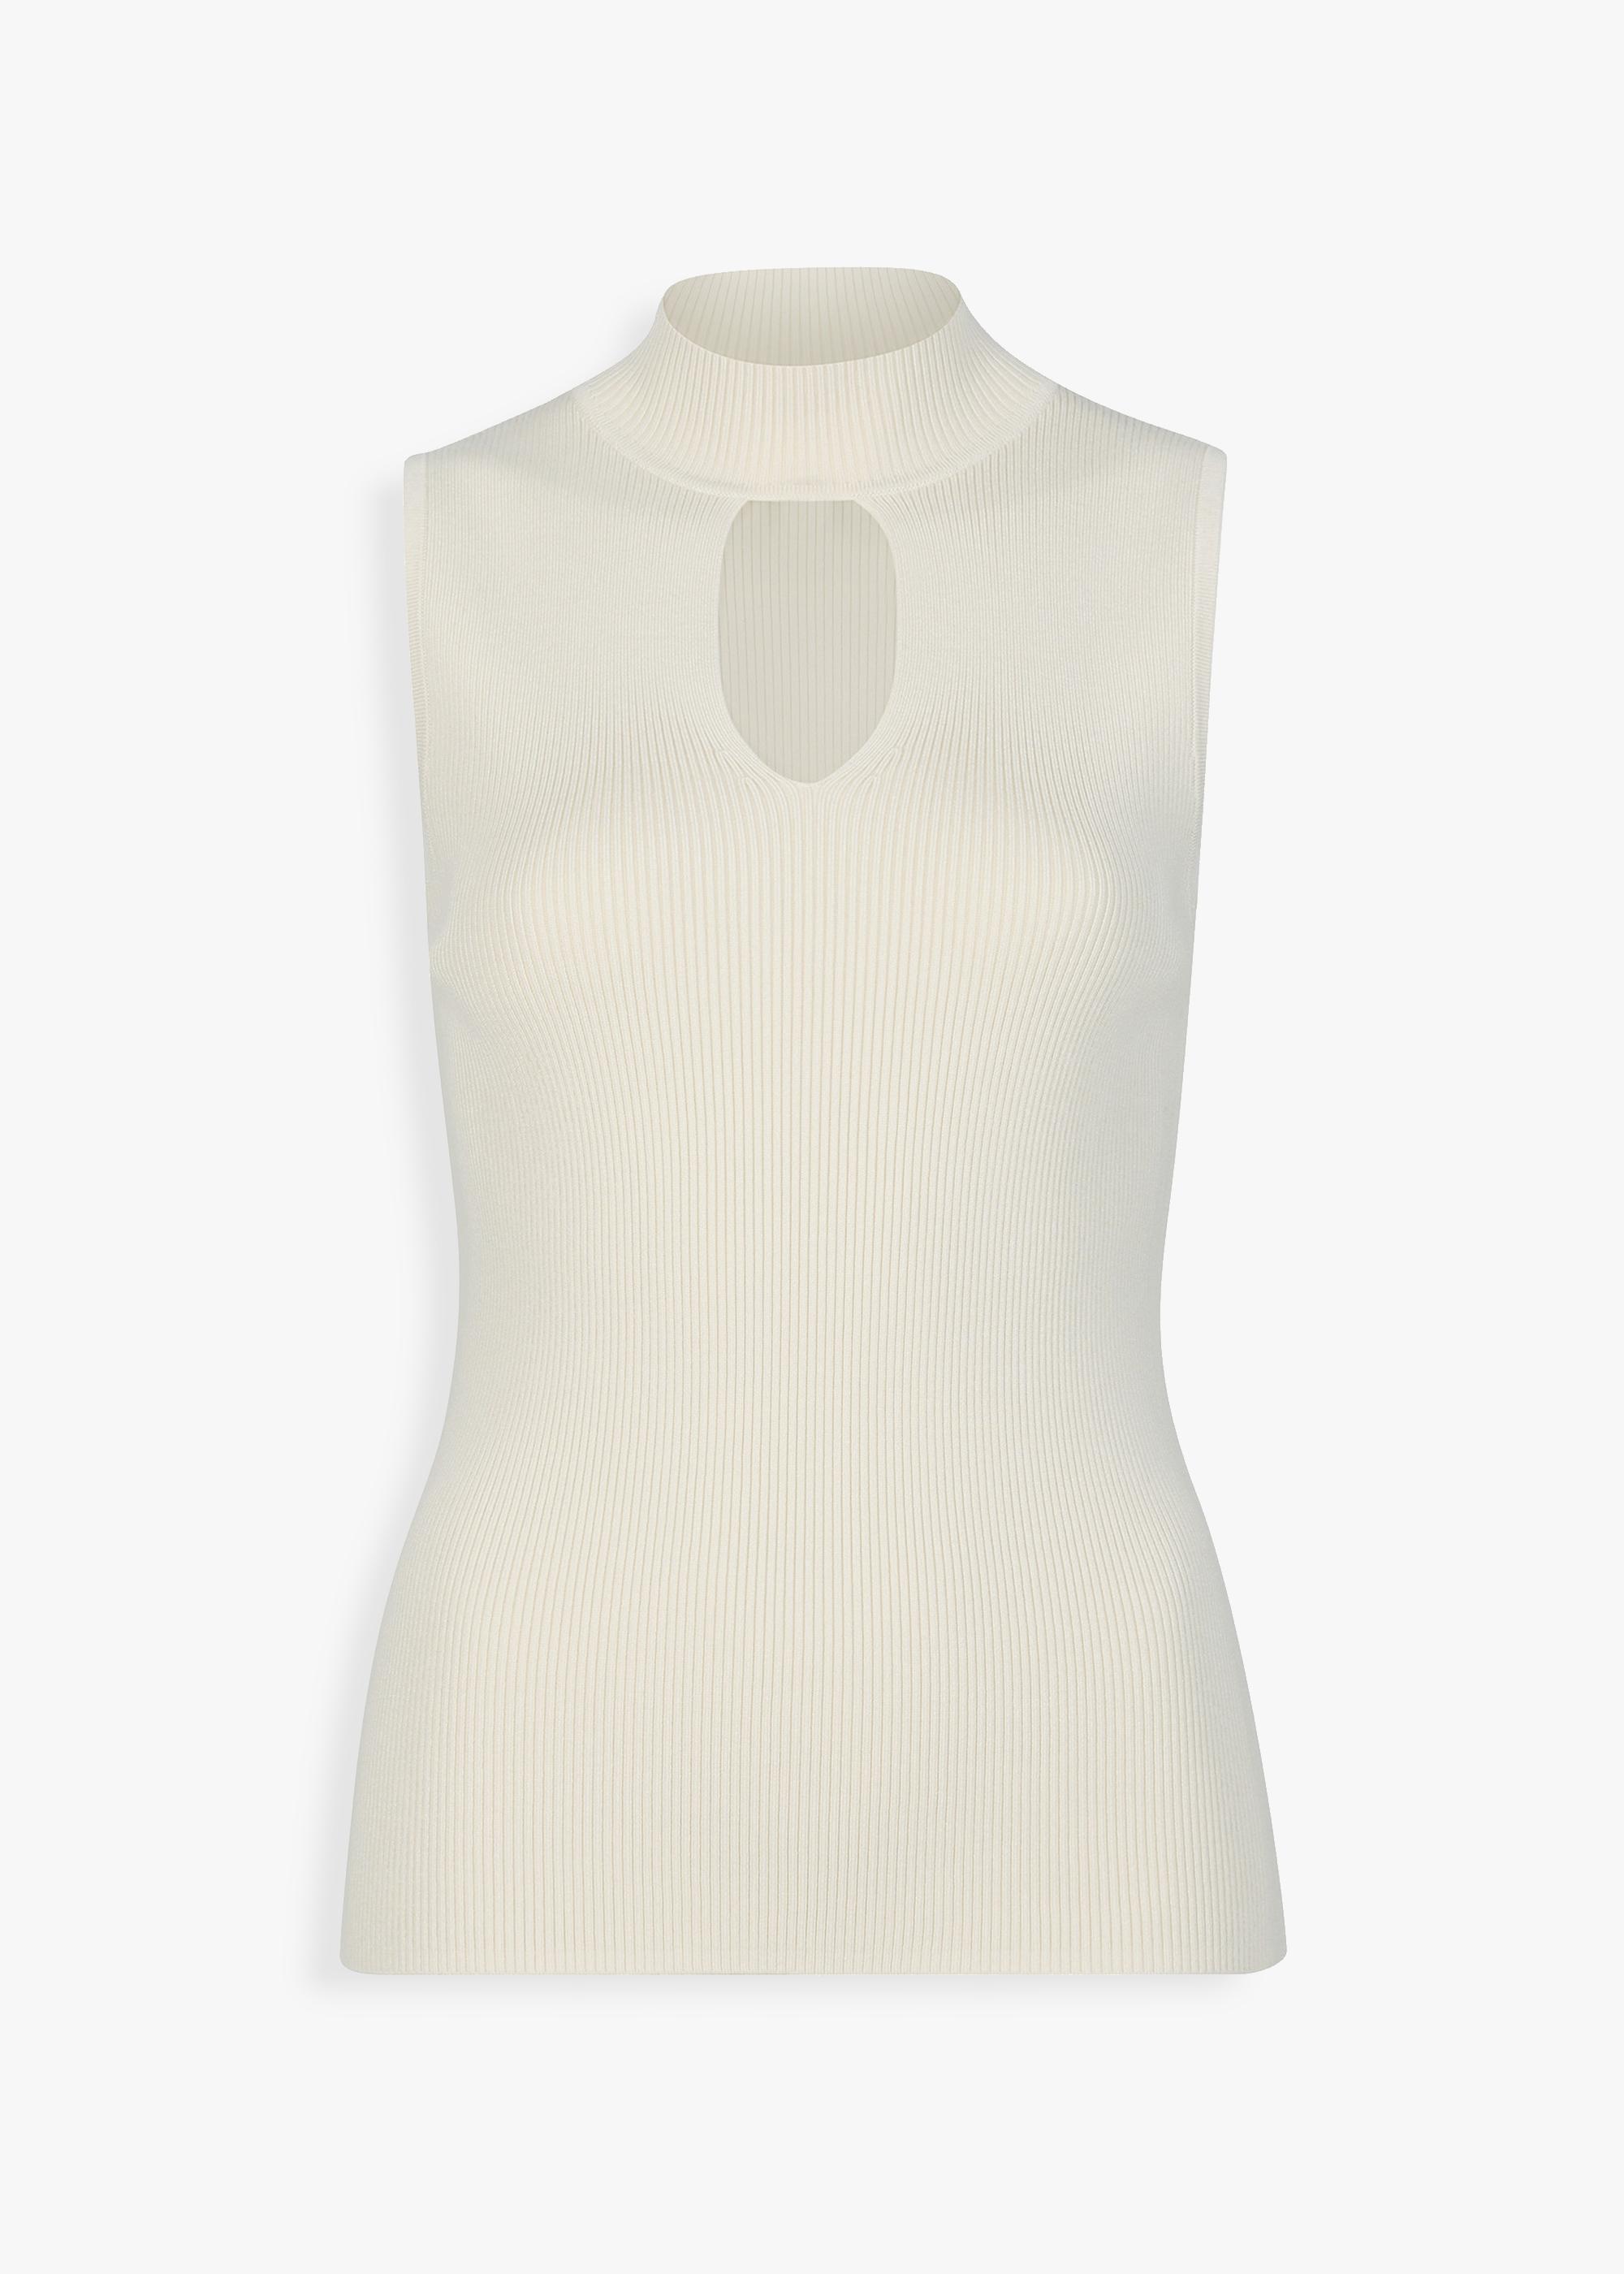 Sleeveless knit top with keyhole neckline - Floral blots - Plus